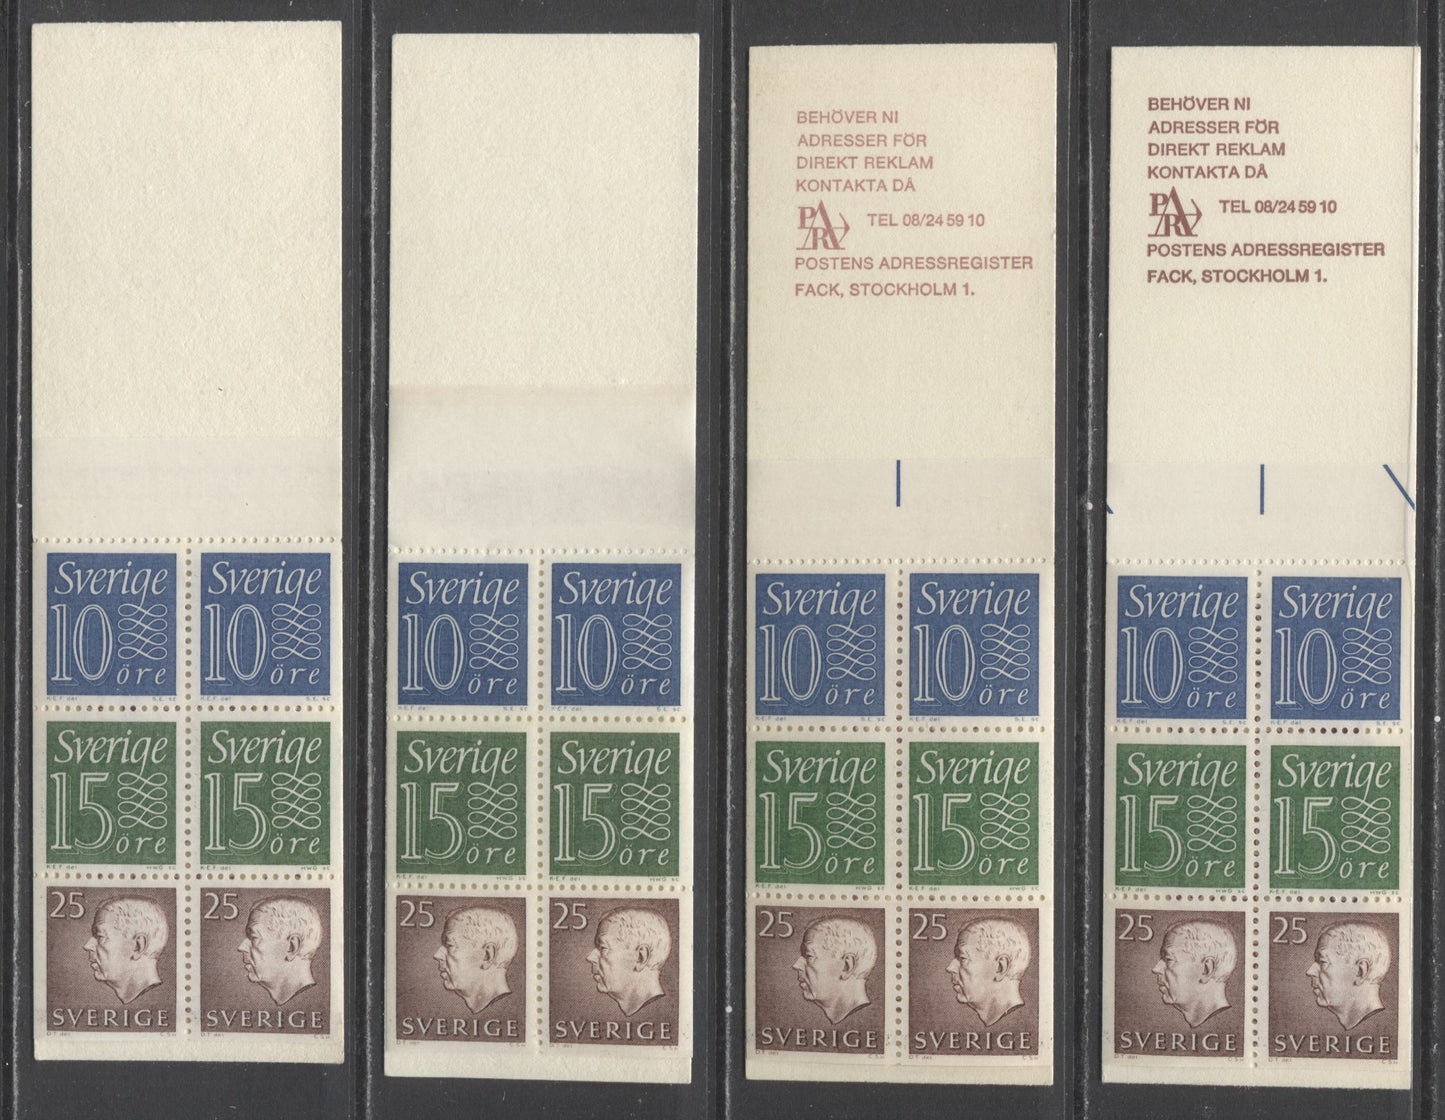 Lot 149 Sweden SC#580a (Facit #HA14B1R)/580a (Facit #HA14F2) 1965-1966 Re-Engraved King Gustav VI Adolf Definitive Issue, All Different With Respect to Back Cover Design, Or Selvedge Markings, 4 VFNH Booklets of 6 (2 +2+2), Estimated Value $15